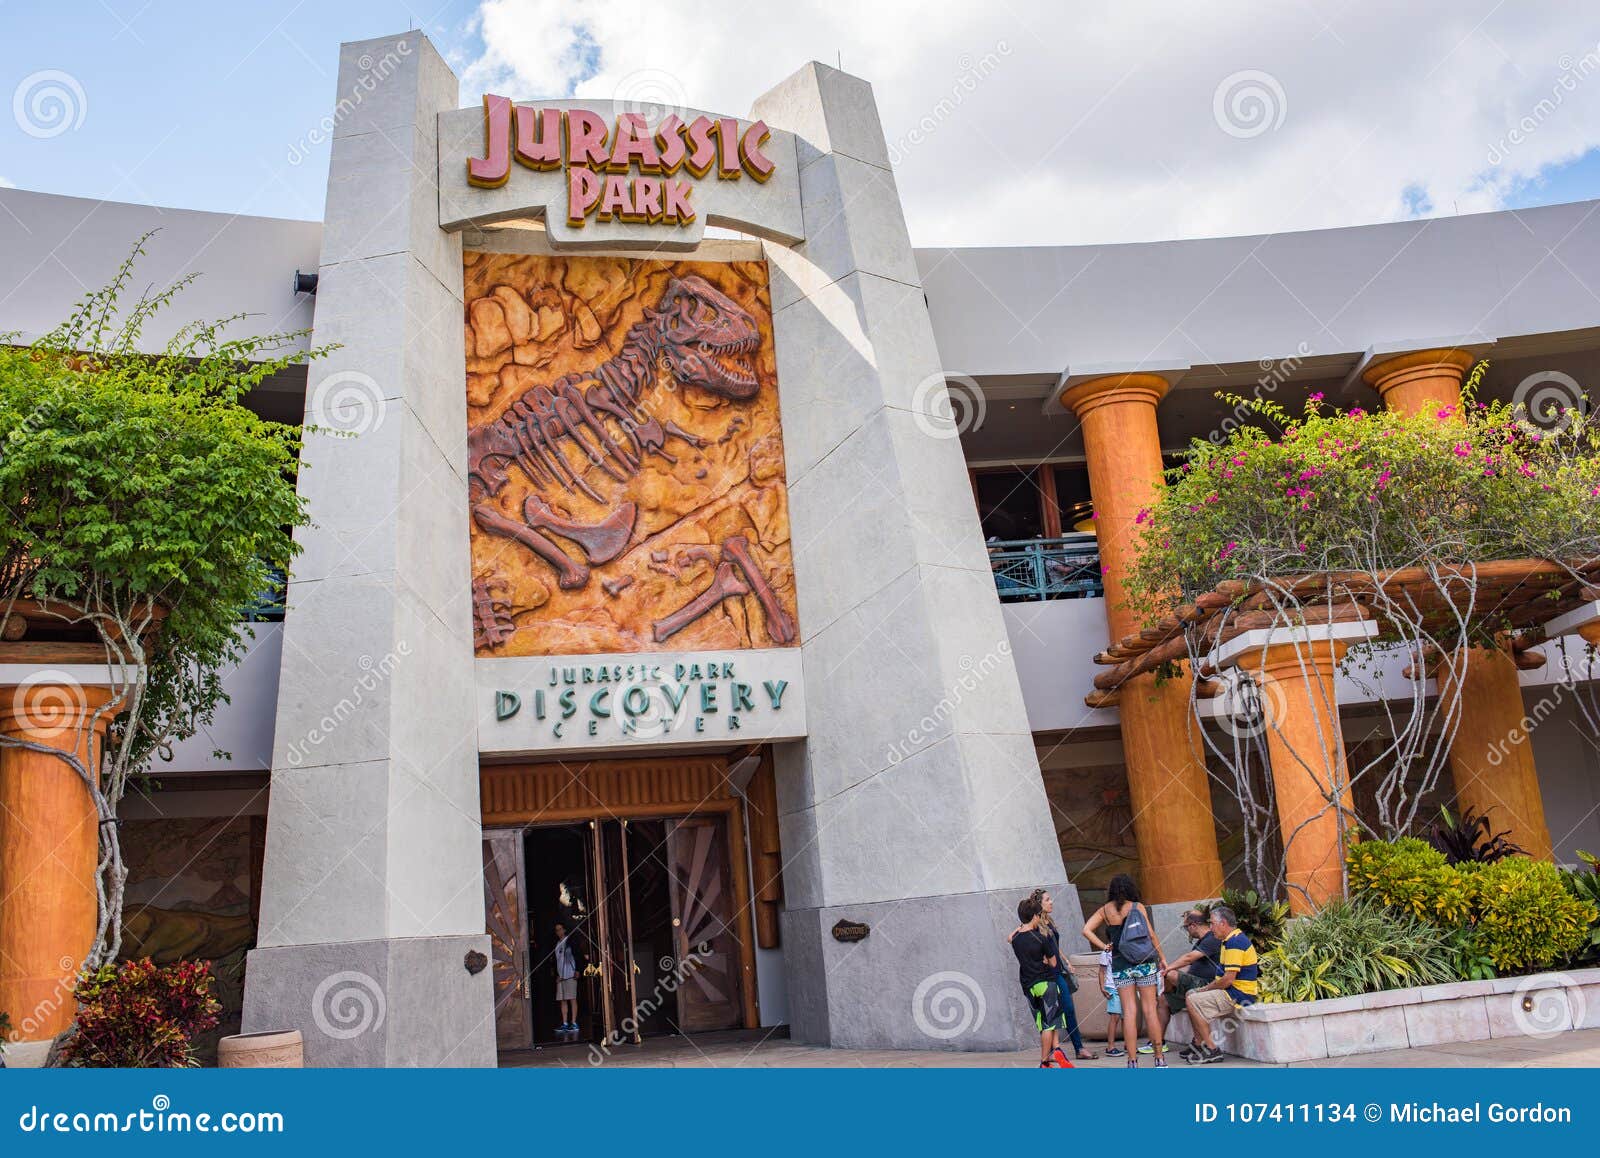 Jurassic Park Discovery Center At Universal Studios Editorial Stock Image Image Of Destination Incredible 107411134 - roblox id jurassic park theme